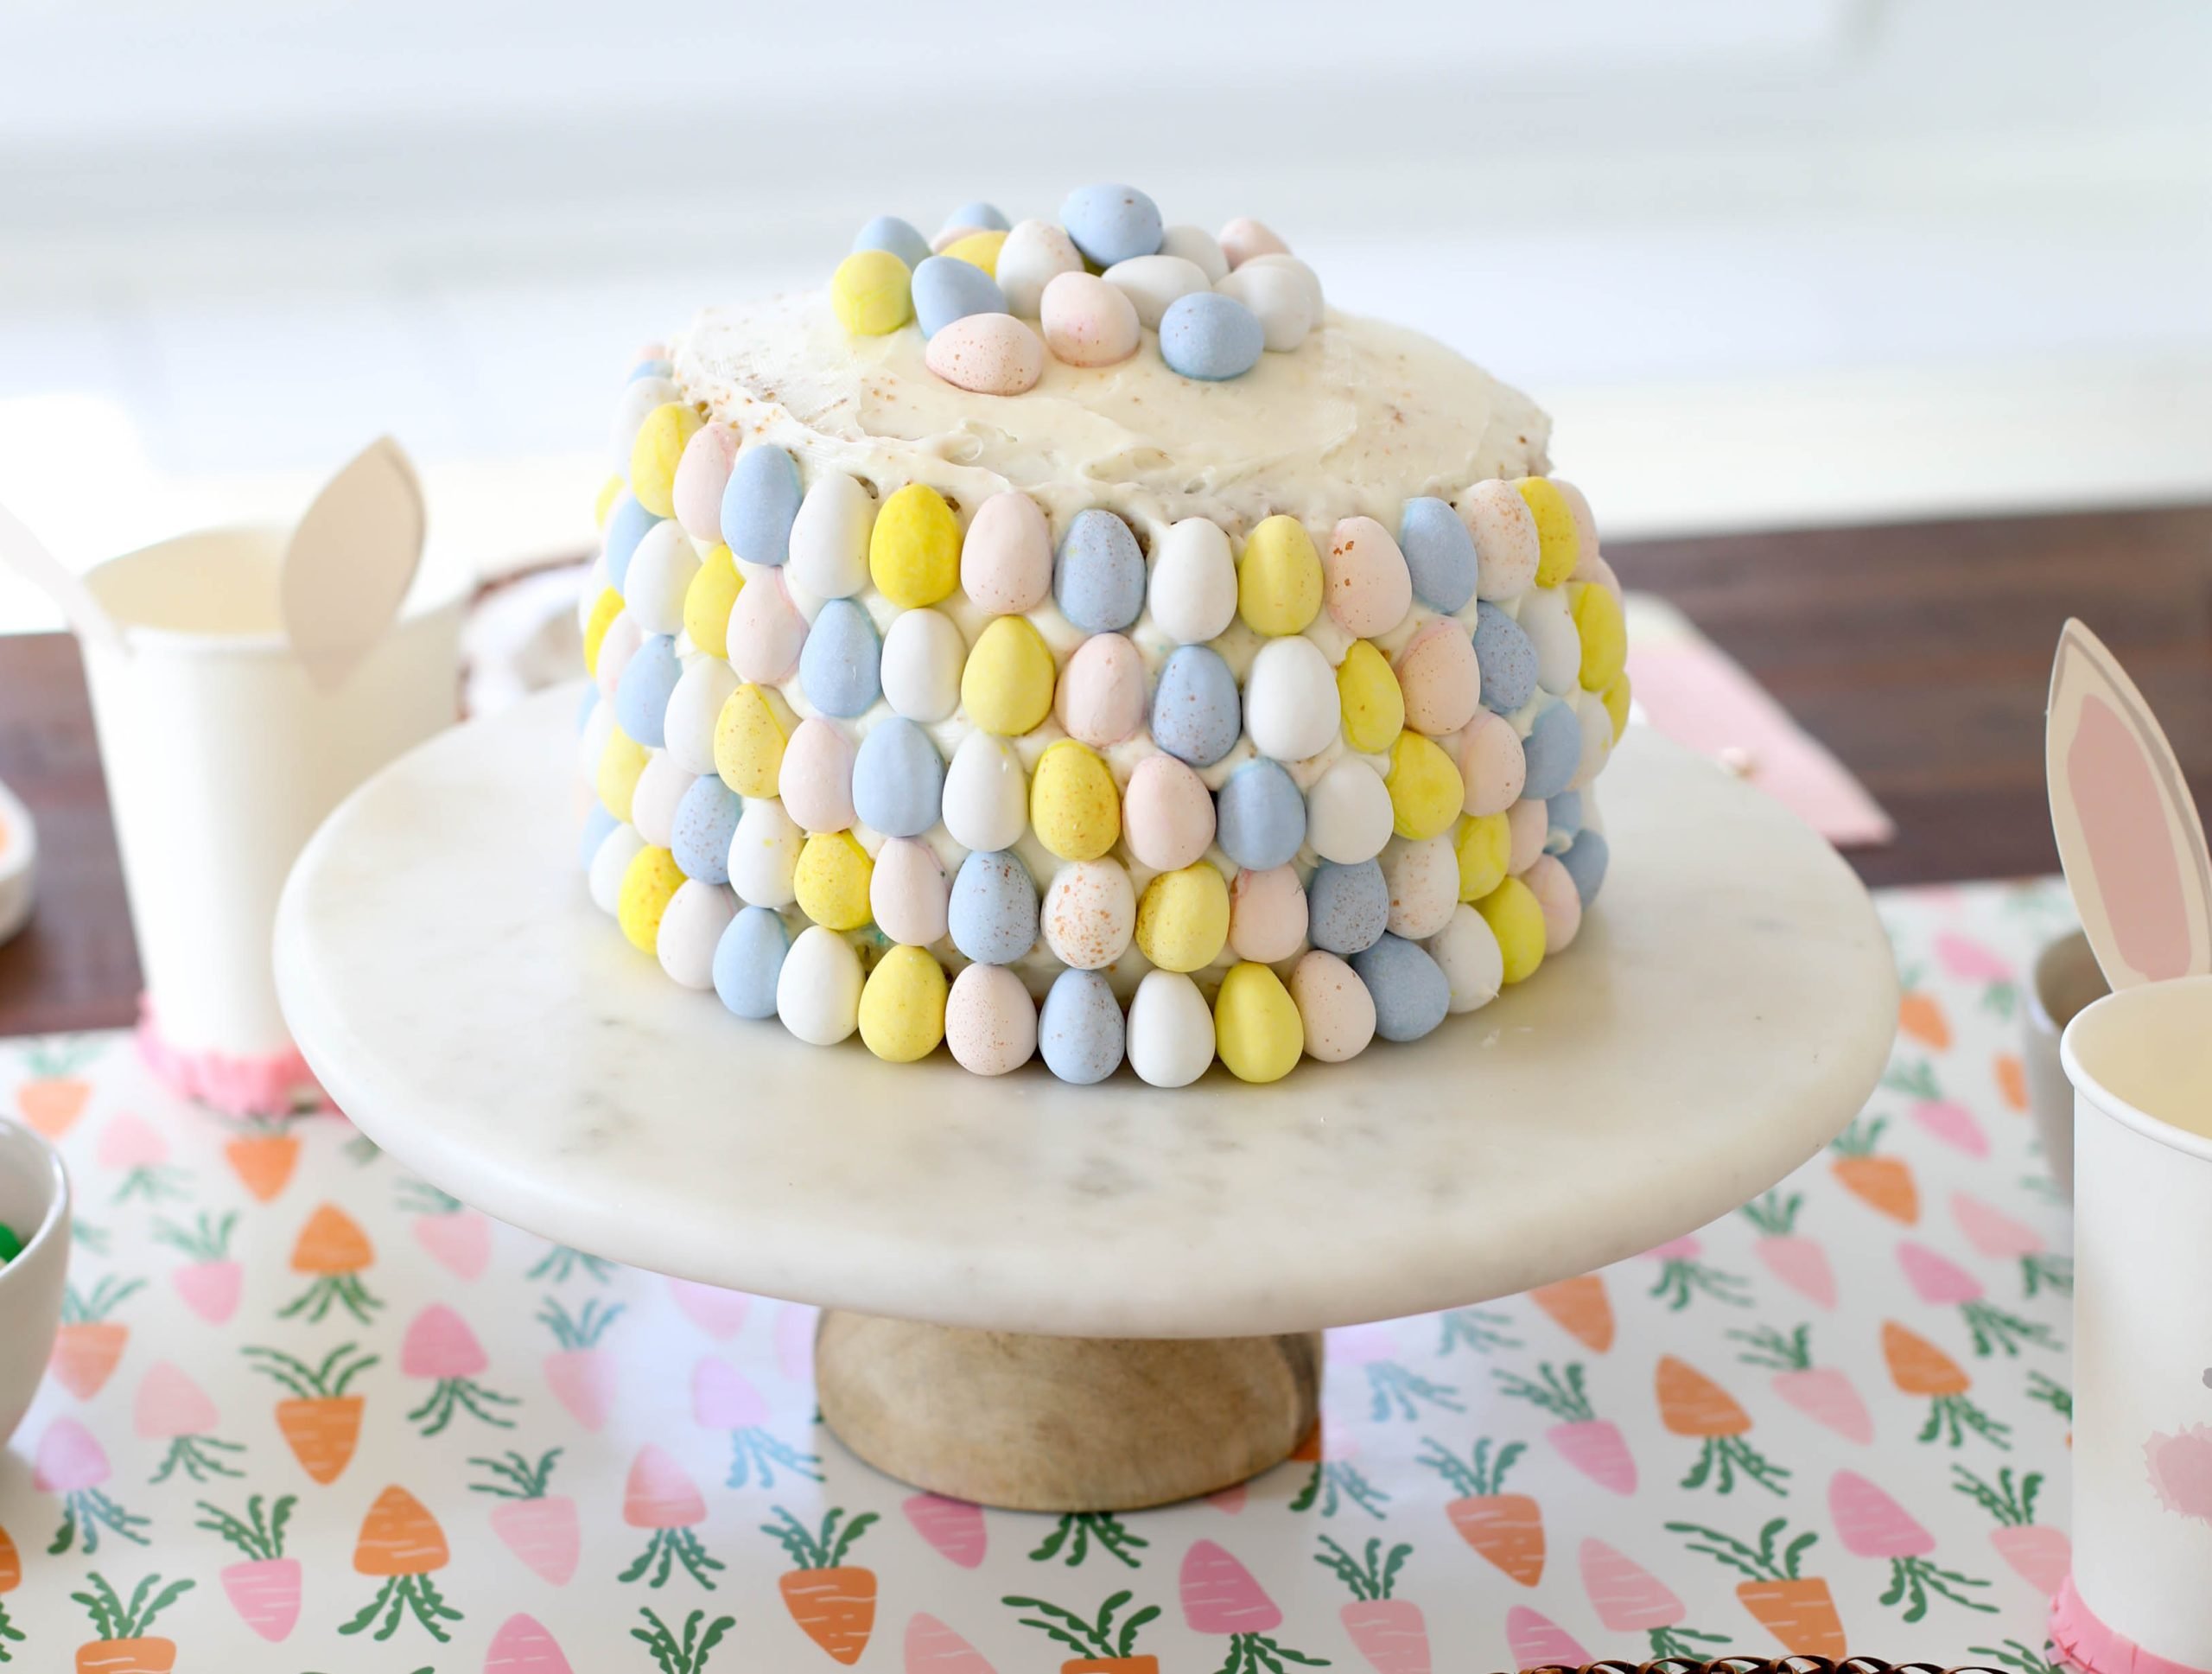 Cake decorated with Cadbury Eggs on an Easter table